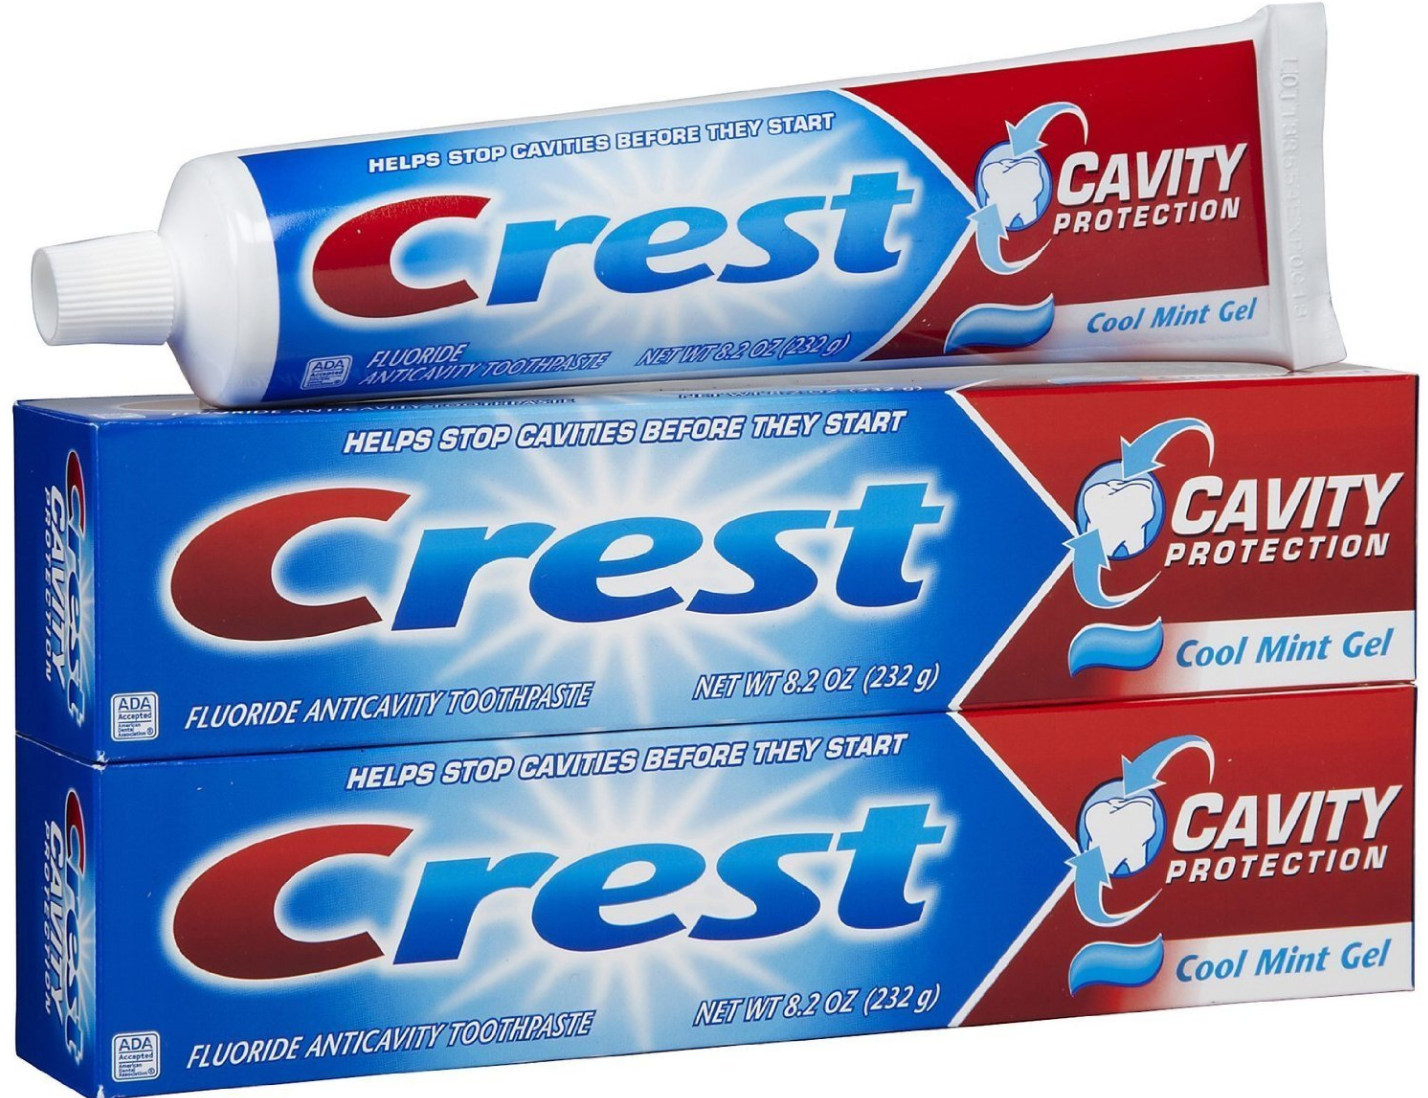 Crest Cavity Protection Gel Toothpaste Cool Mint Gel, 6.4 oz., (Pack of 2) as low as $1.17/each shipped (reg. $9.62)